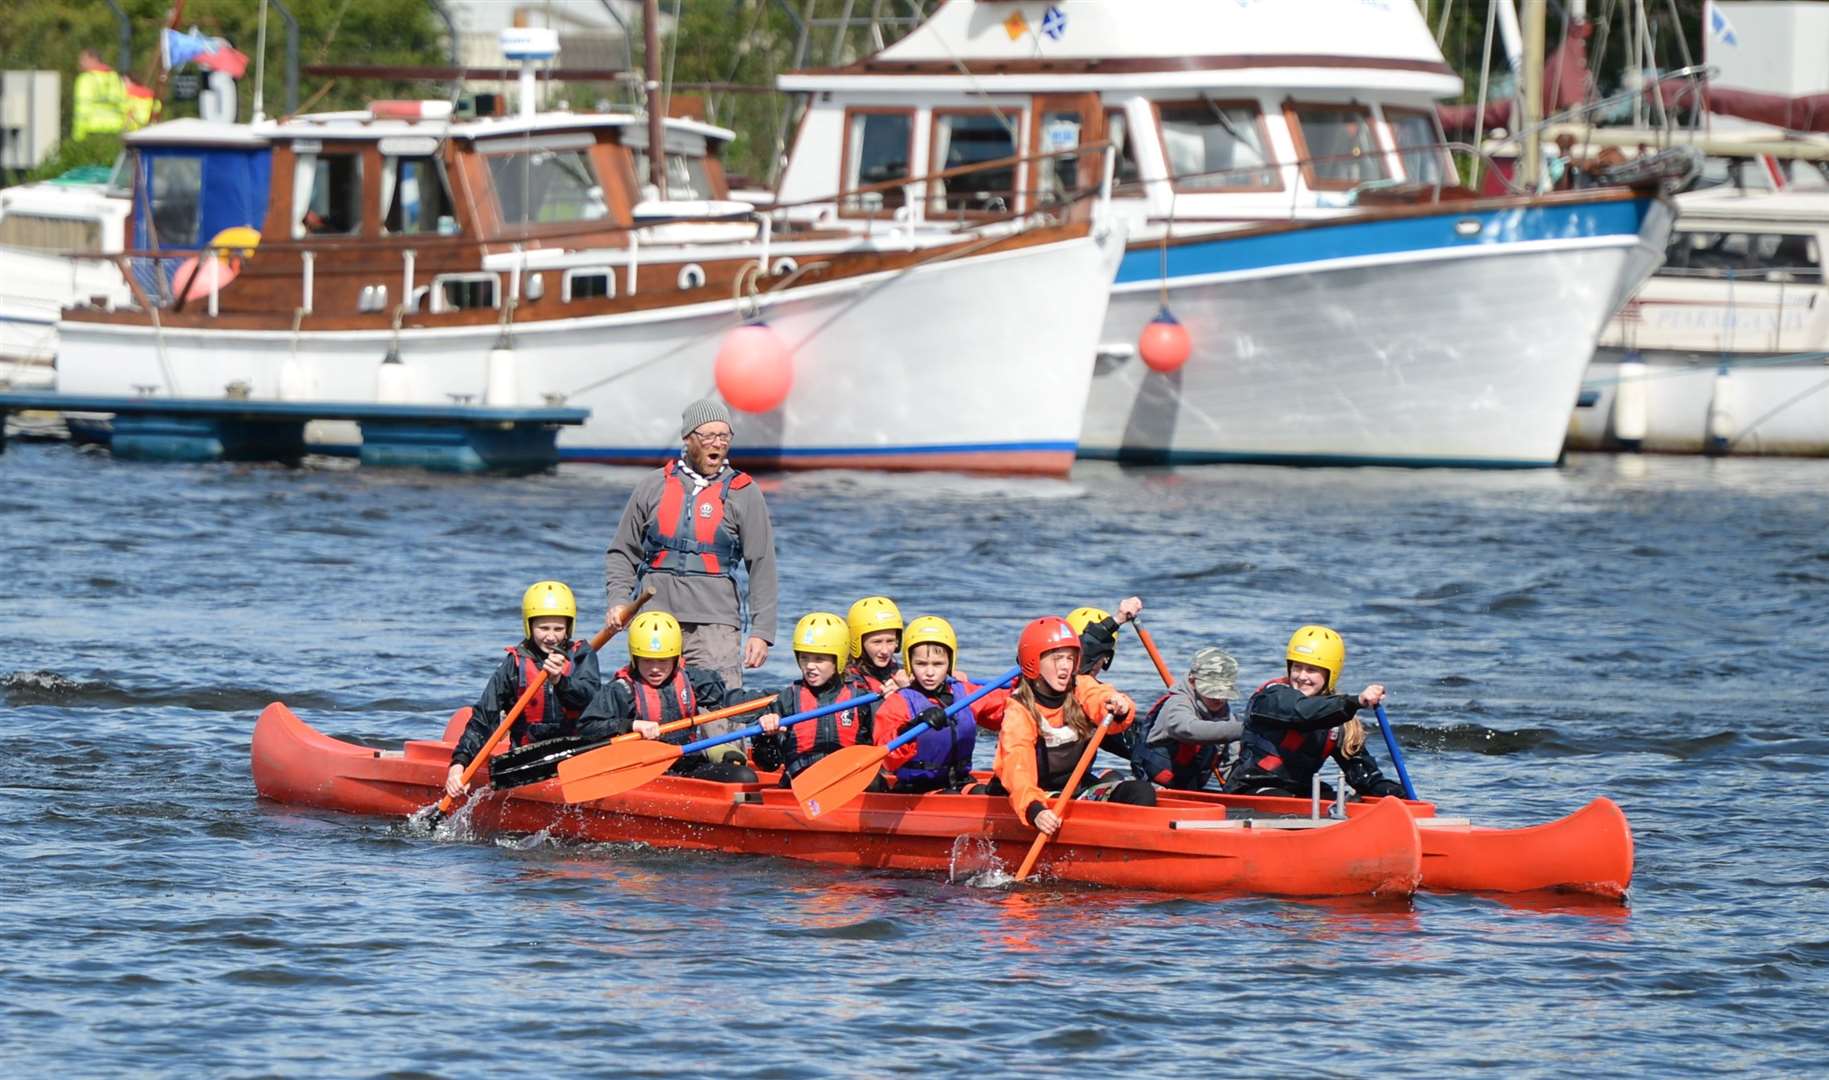 A possible new base for Inverness Sea Cadets forms part of the plans by Scottish Canals.